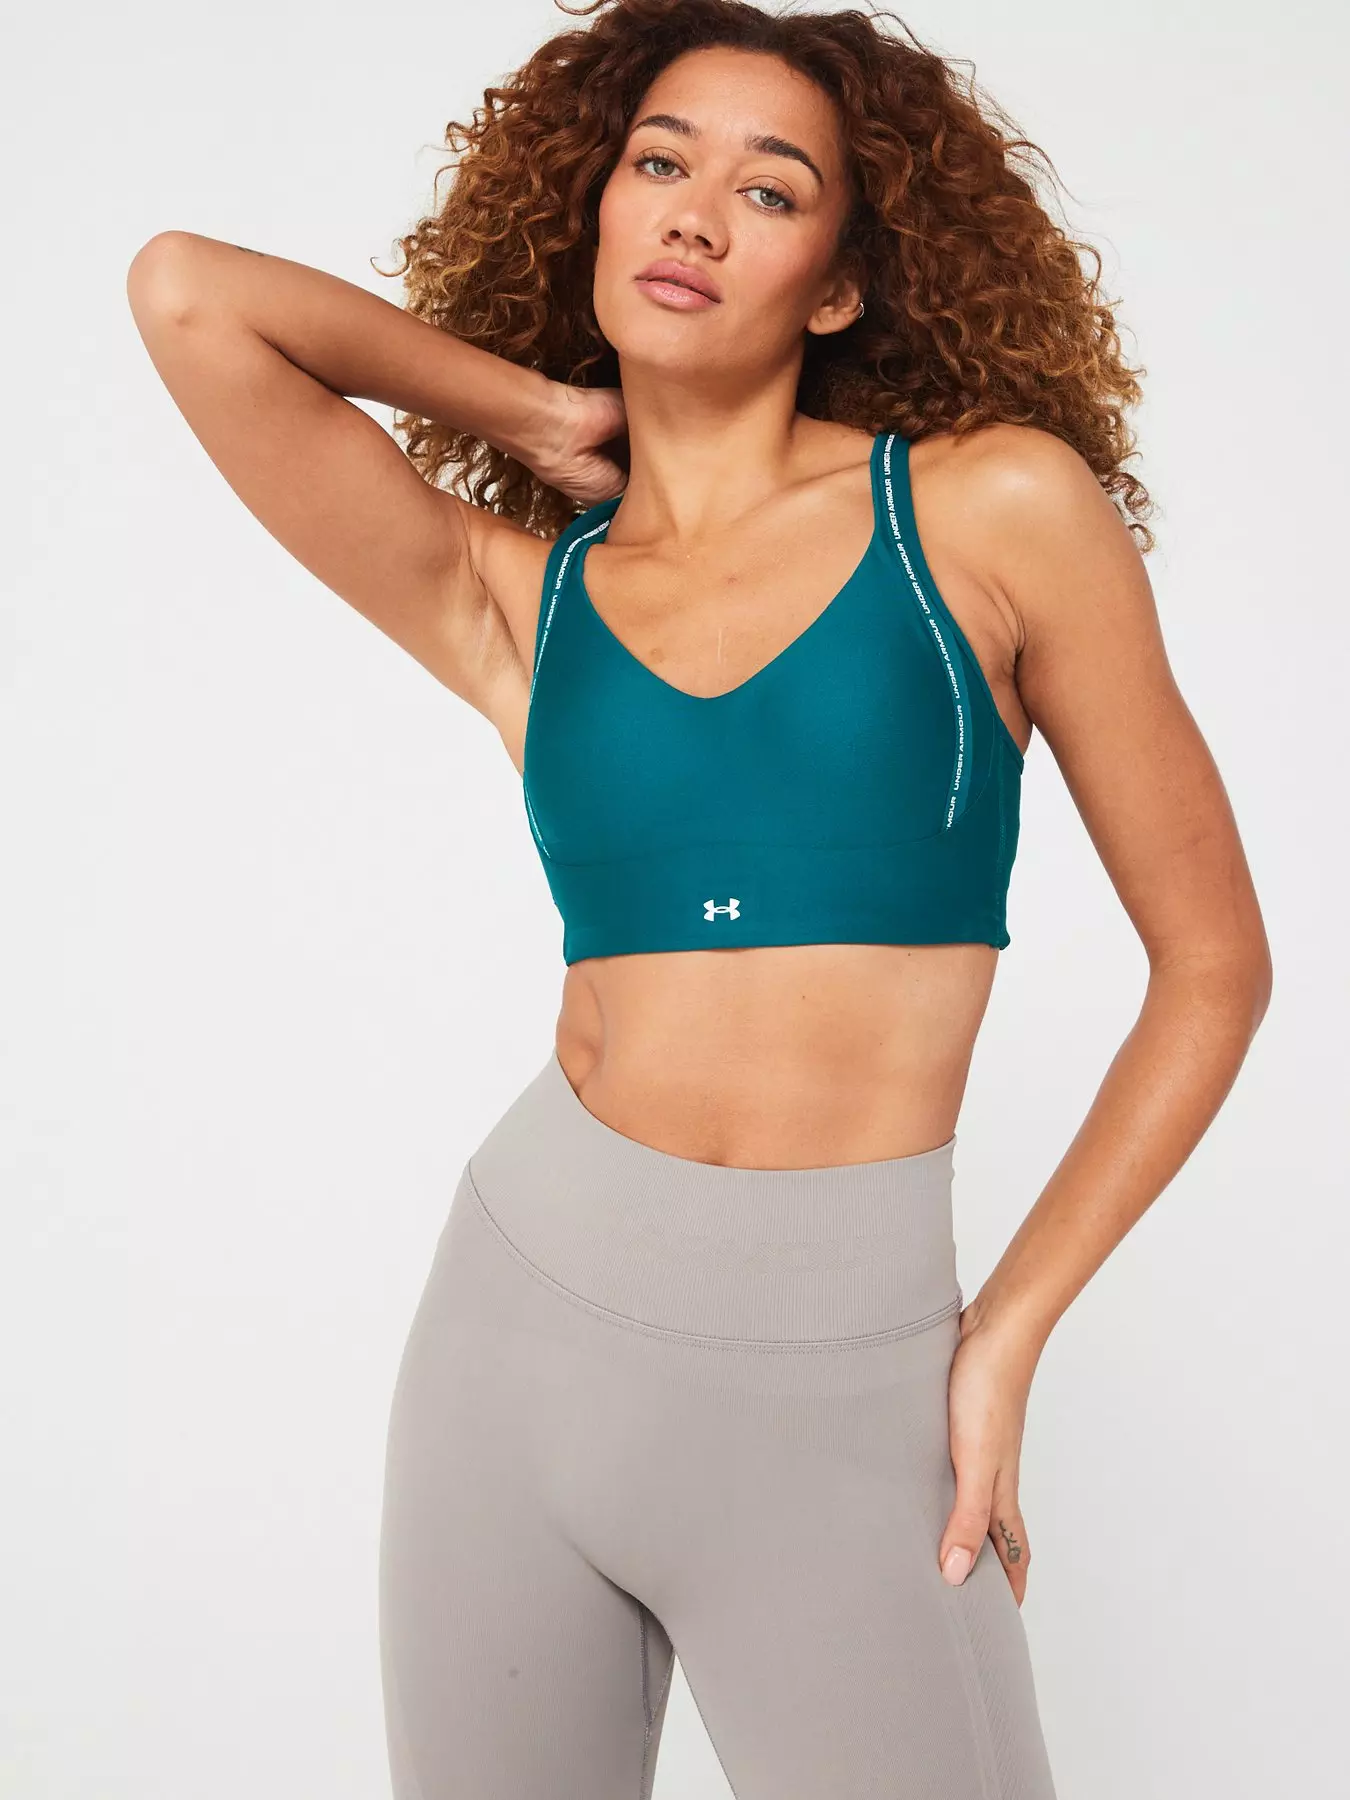 UNDER ARMOUR Intimates Green Ribbed Strappy Light Support Compression  Sports Bra XS 